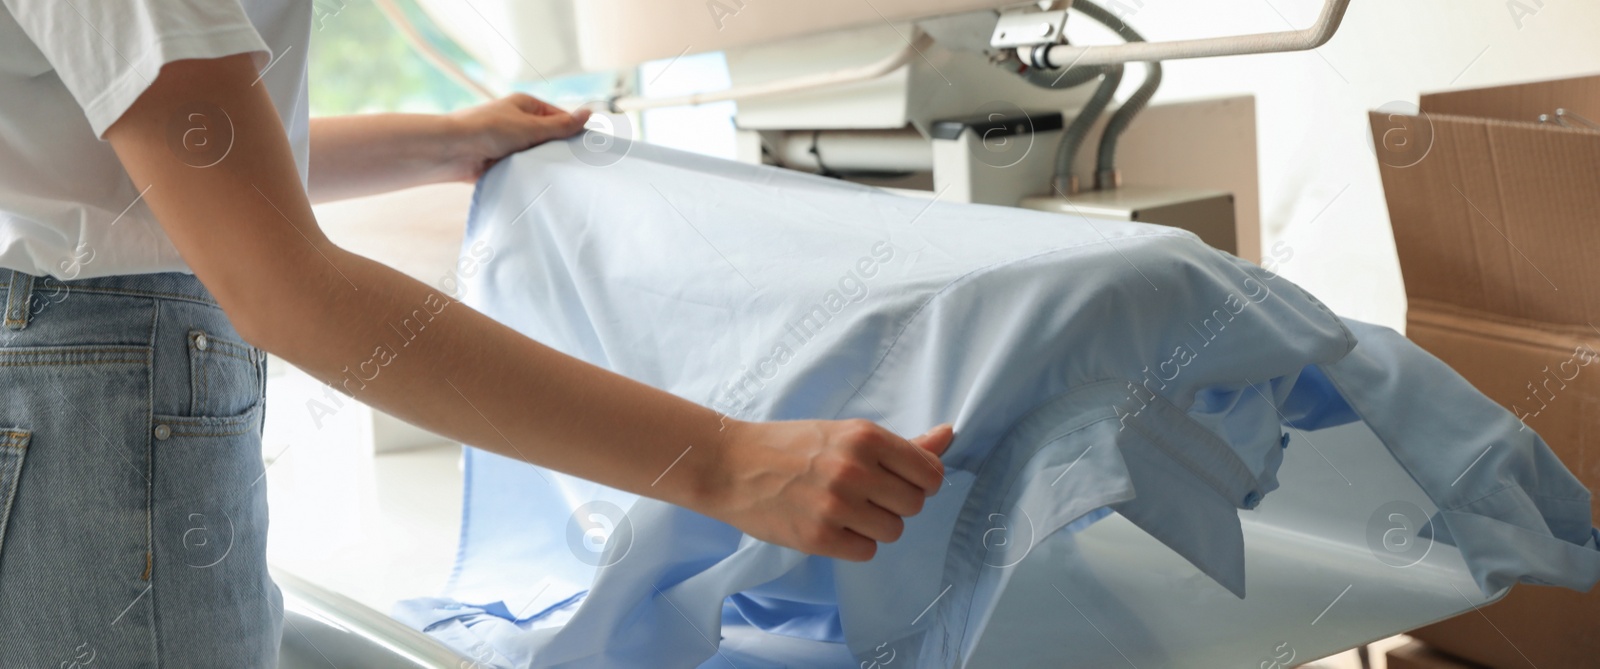 Image of Closeup view of female worker using ironing press, banner design. Dry-cleaning service